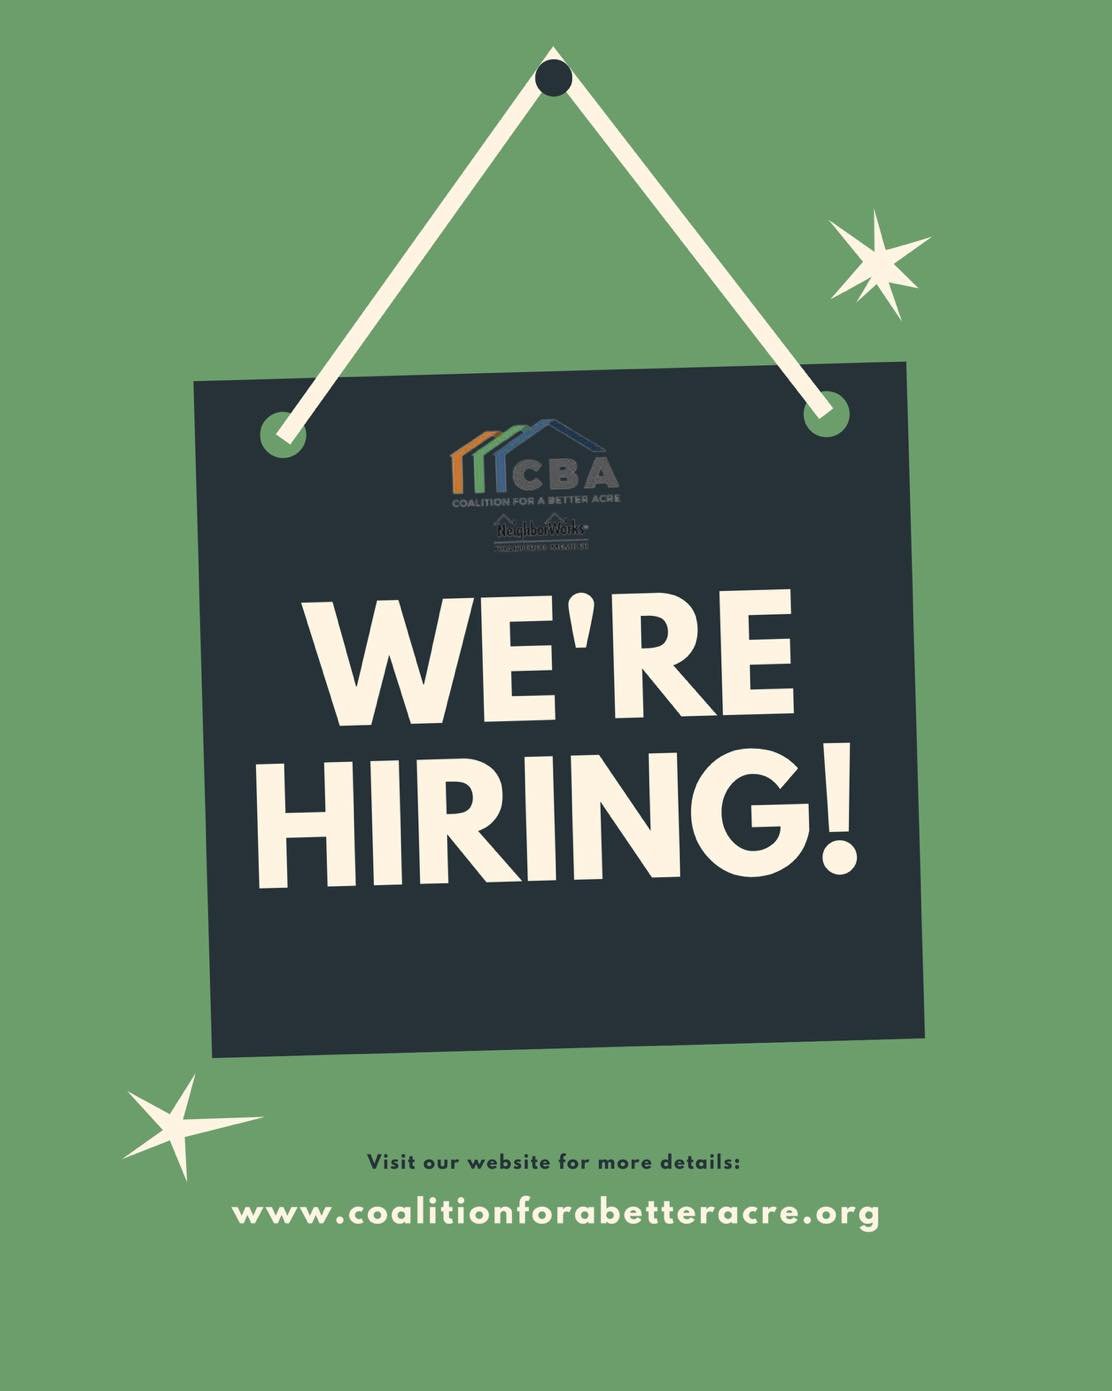 We still have a few open positions here at Coalition for a Better Acre. Opportunities range from PT -FT. 

If you're looking to join an impactful and fun organization---we encourage you to check out the listings on our website.